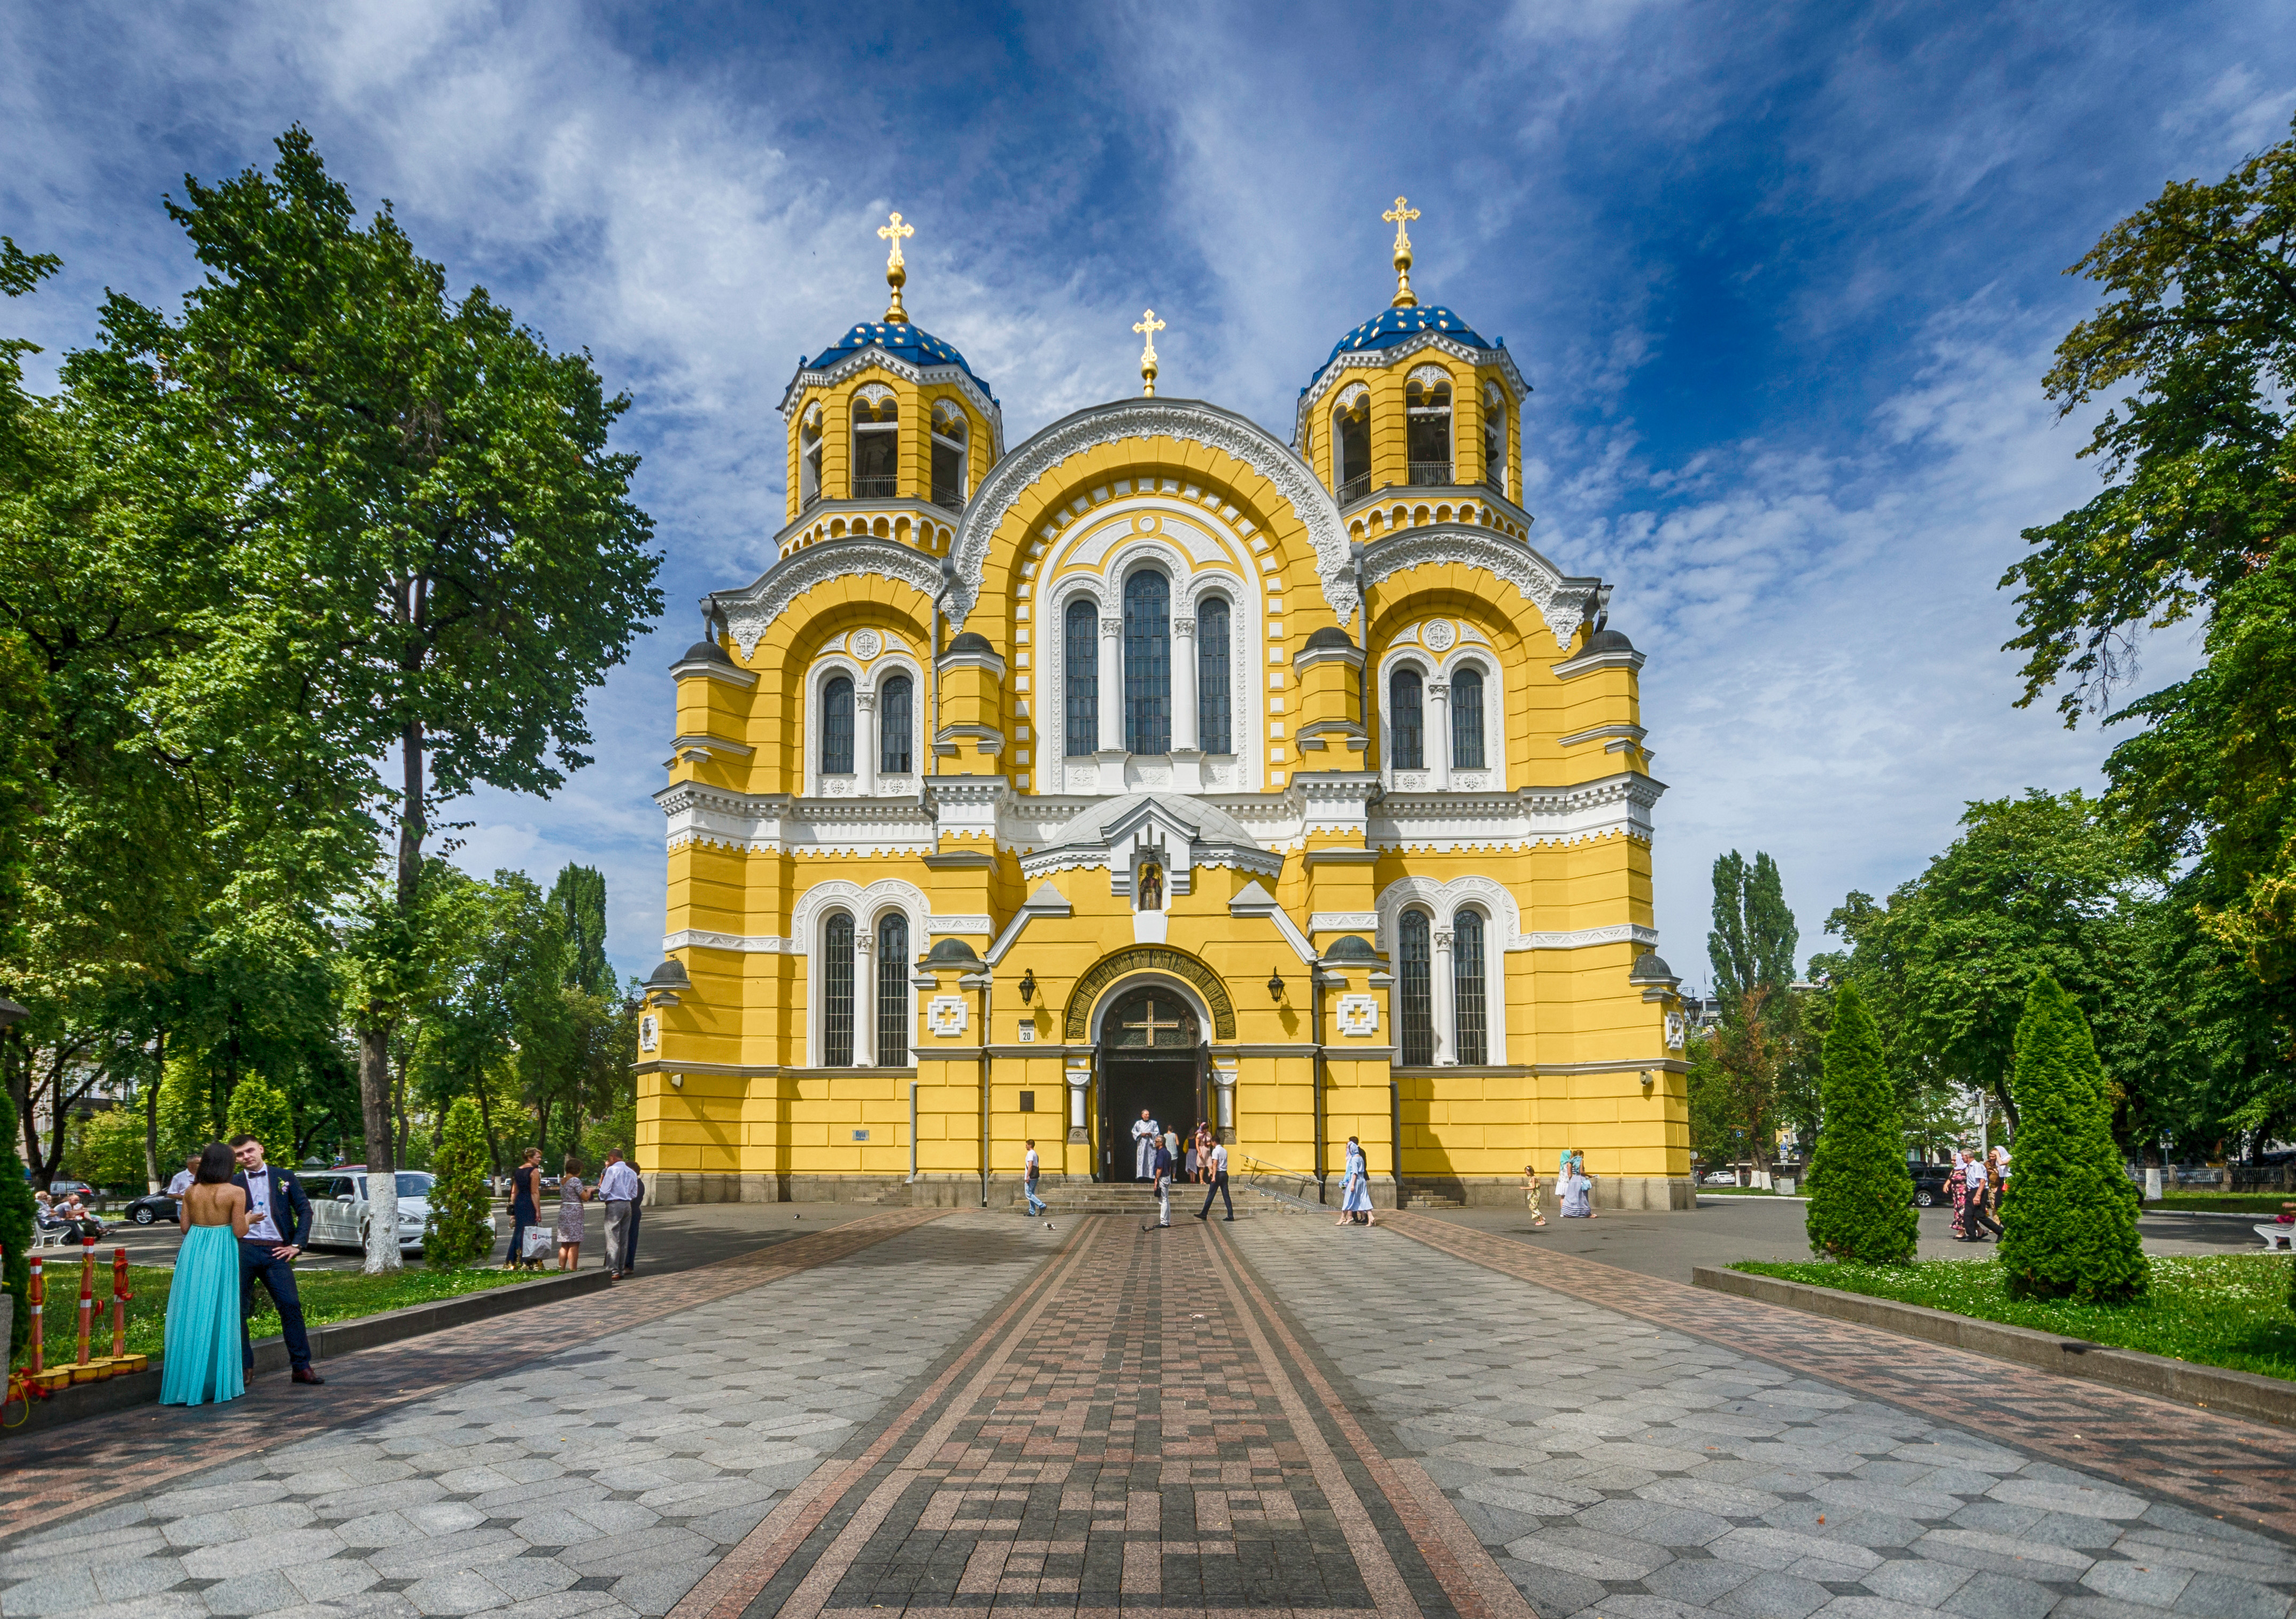 St Volodymyr's Cathedral in Kyiv is the mother cathedral of the Ukrainian Orthodox Church – Kyiv Patriarchate.